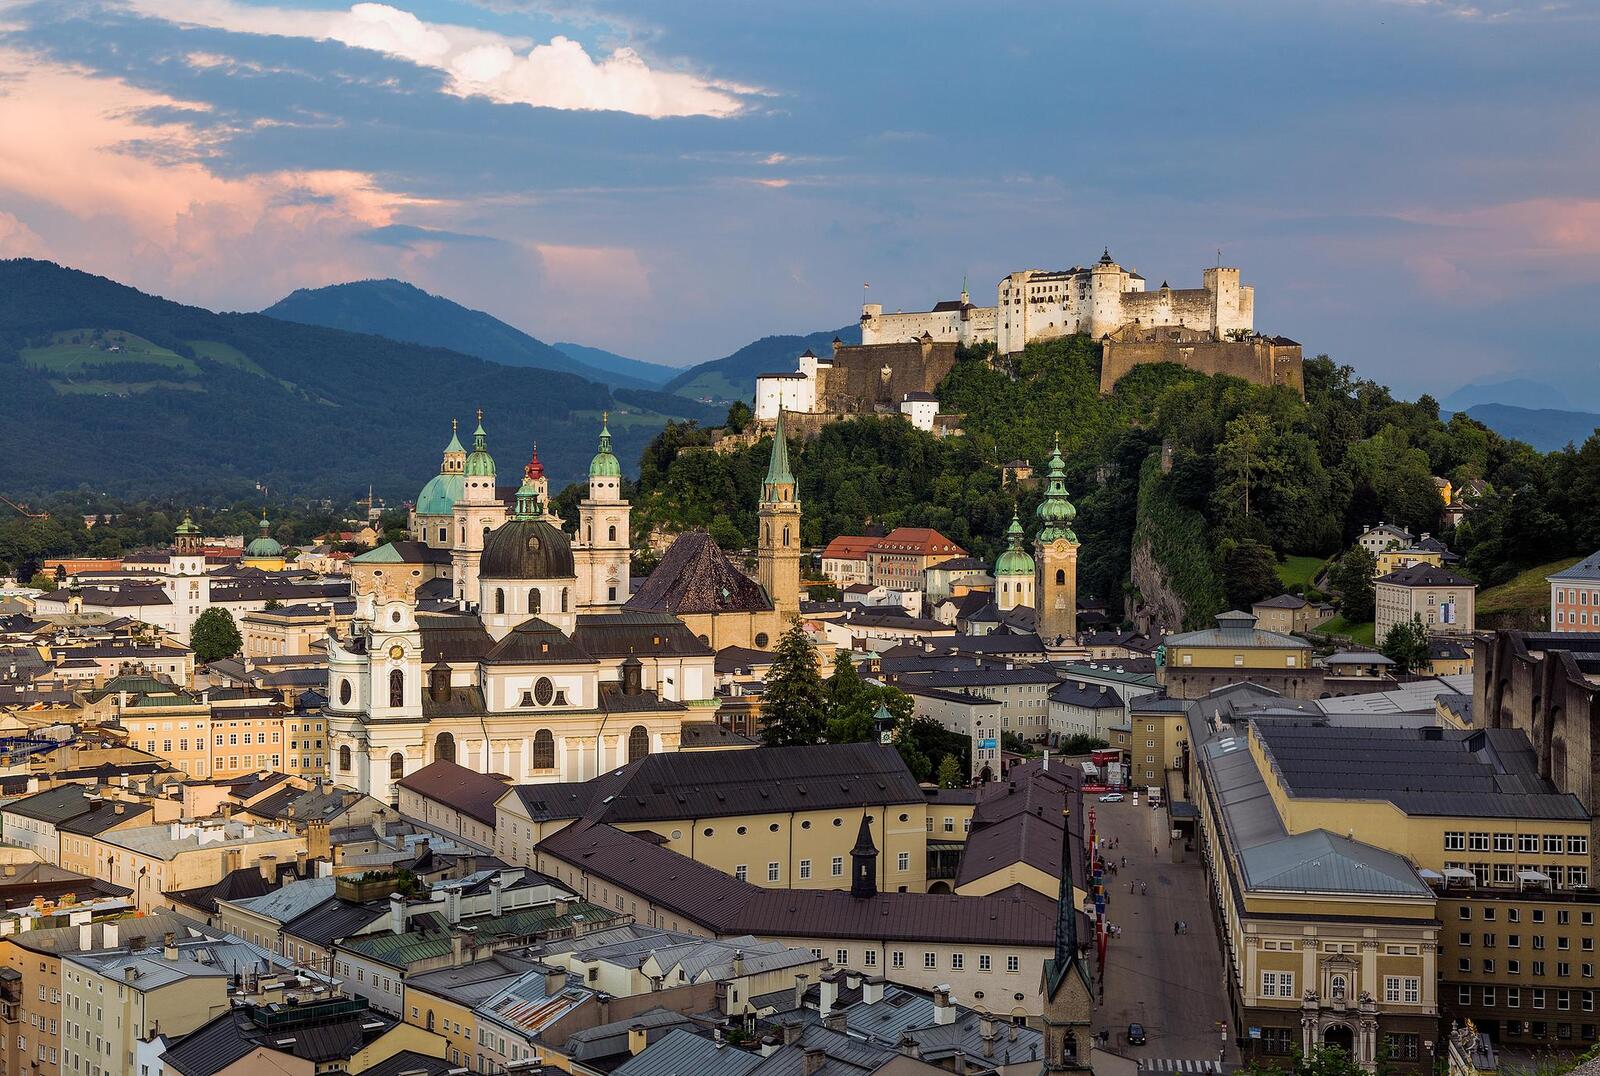 Wallpapers The castle of Salzburg with views of the Old town Salzburg Austria on the desktop